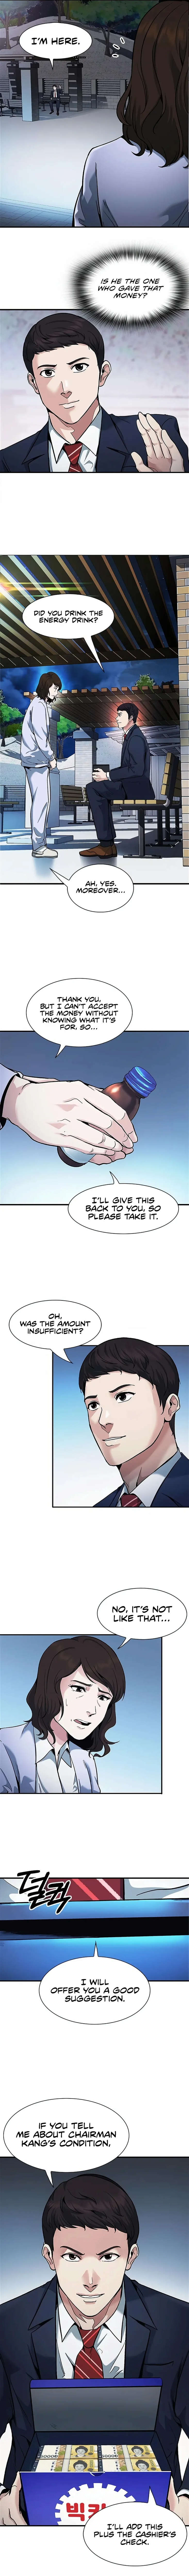 Chairman Kang: The Newcomer Chapter 5 page 11